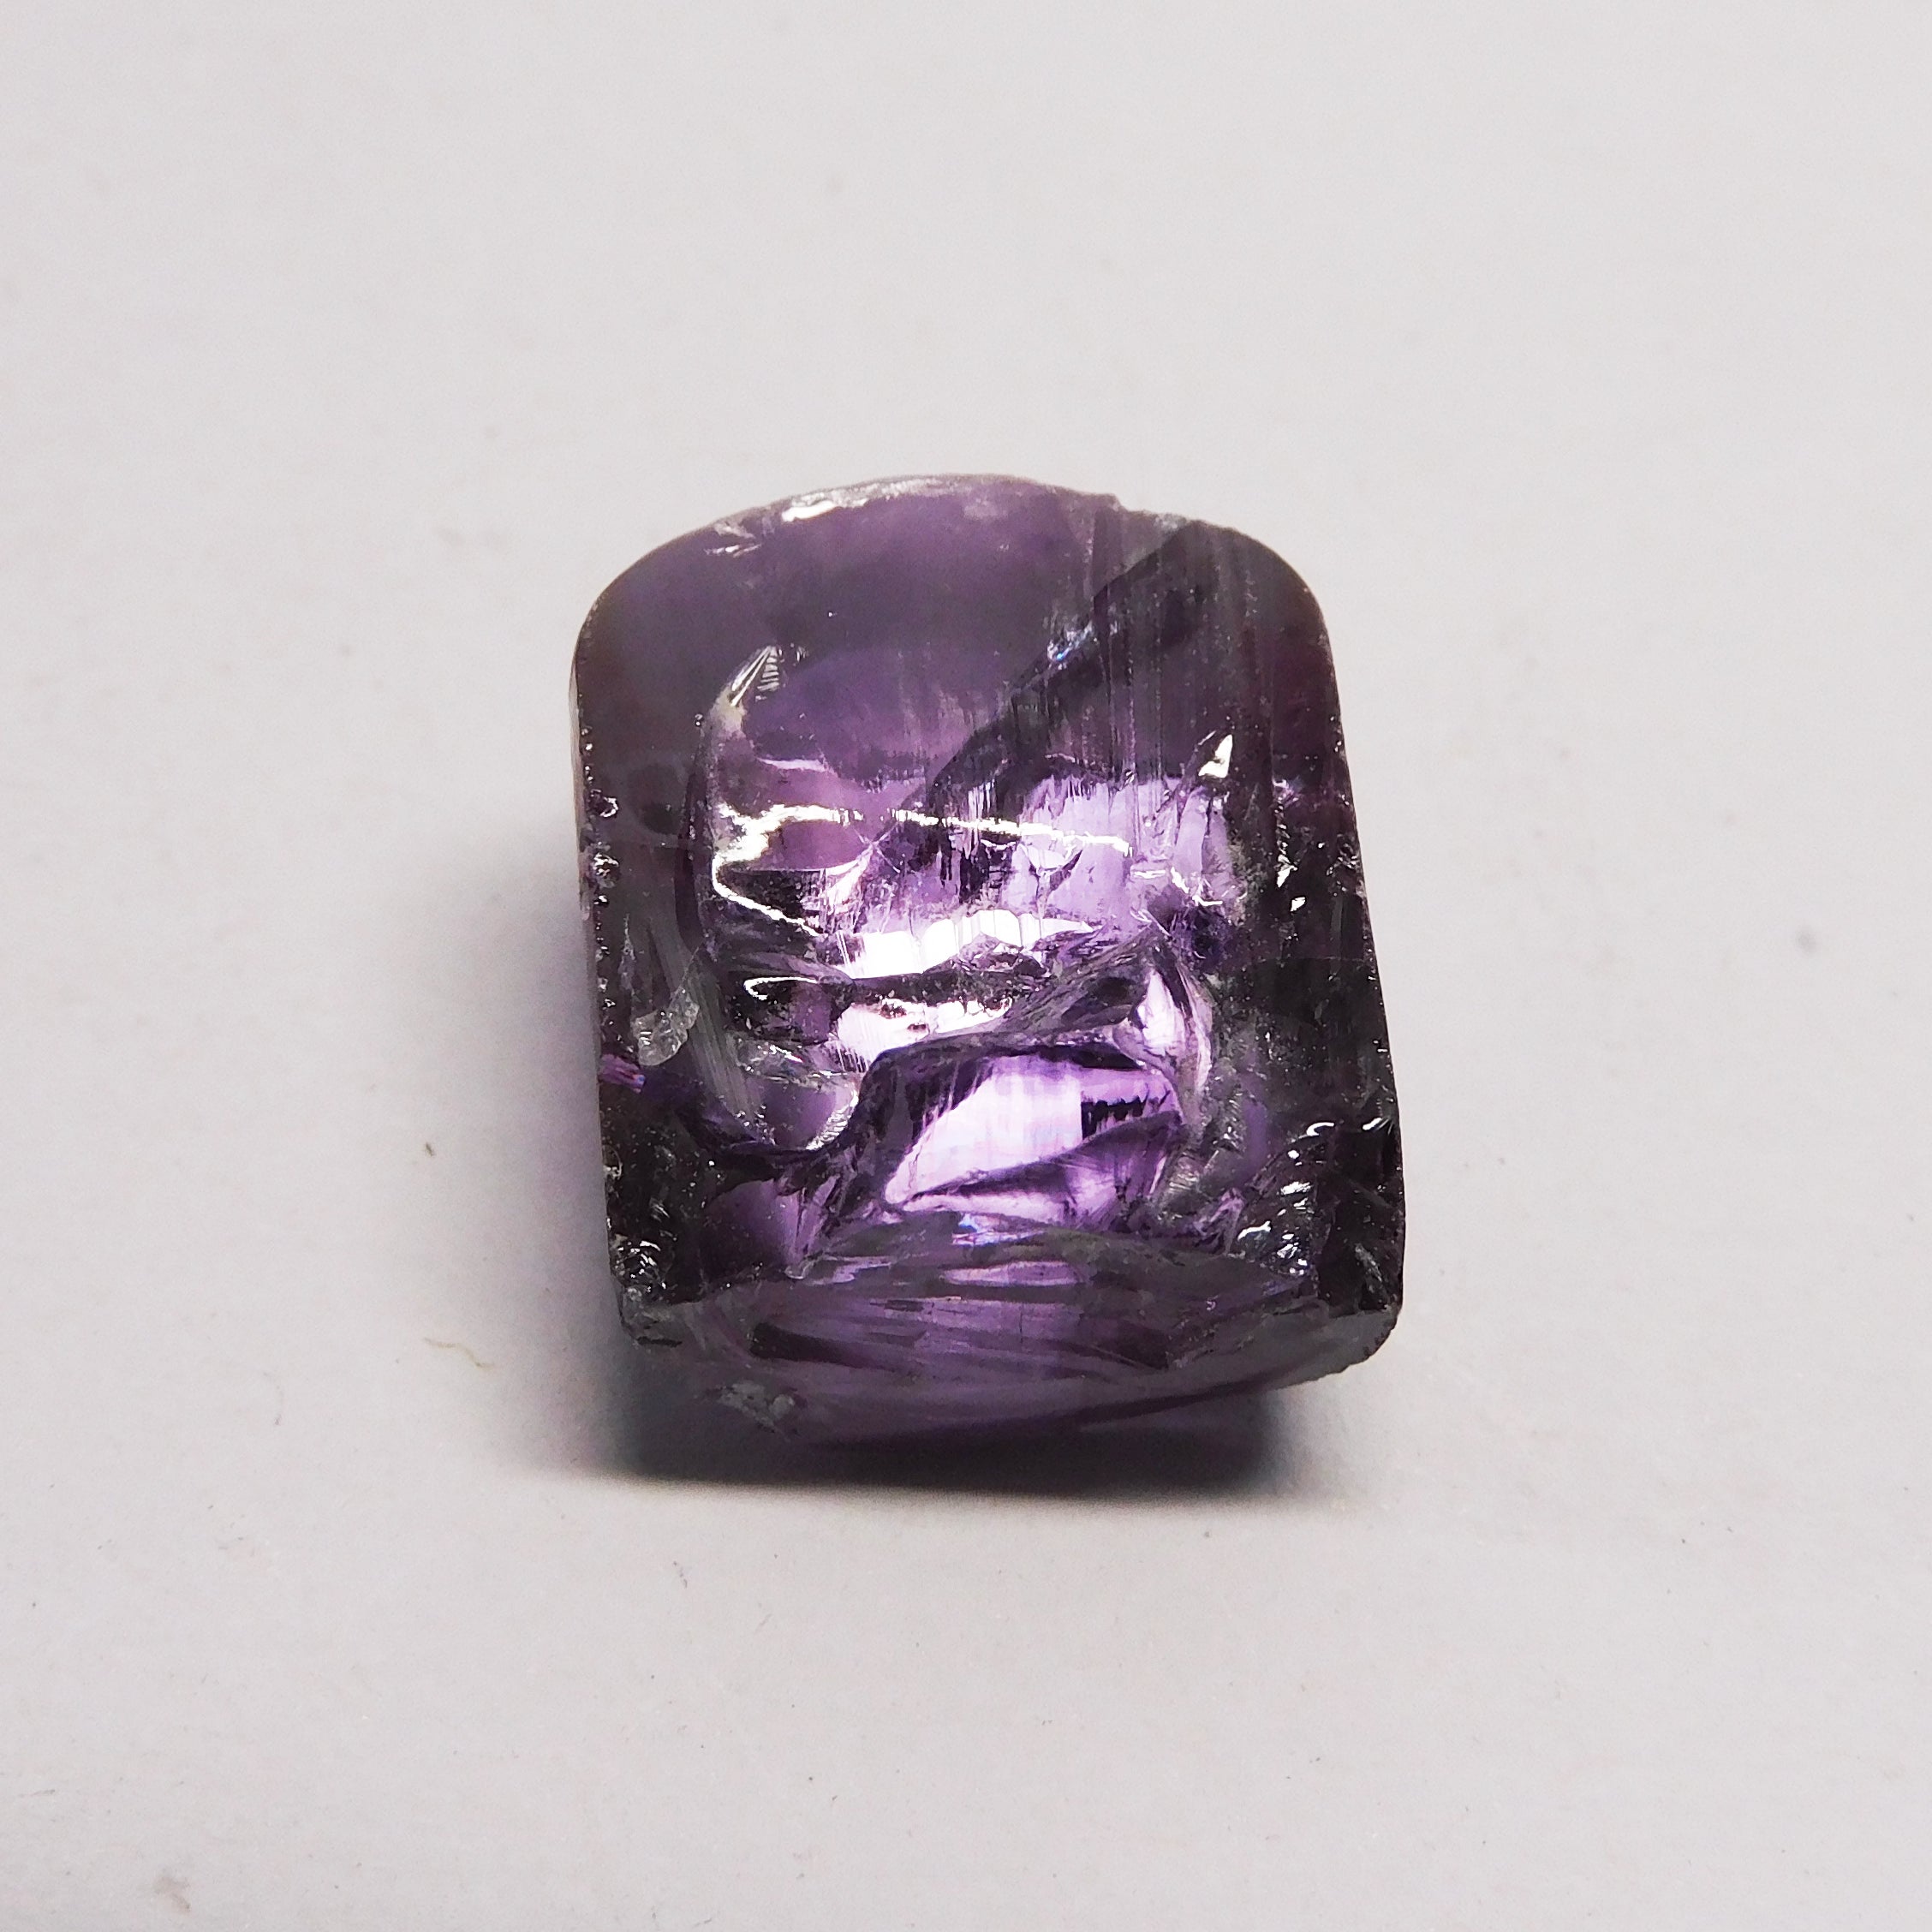 Summer's Offer !! CERTIFIED Raw Color Change Natural Alexandrite 36.00 Carat Loose Gemstone Uncut Rough | Best Price